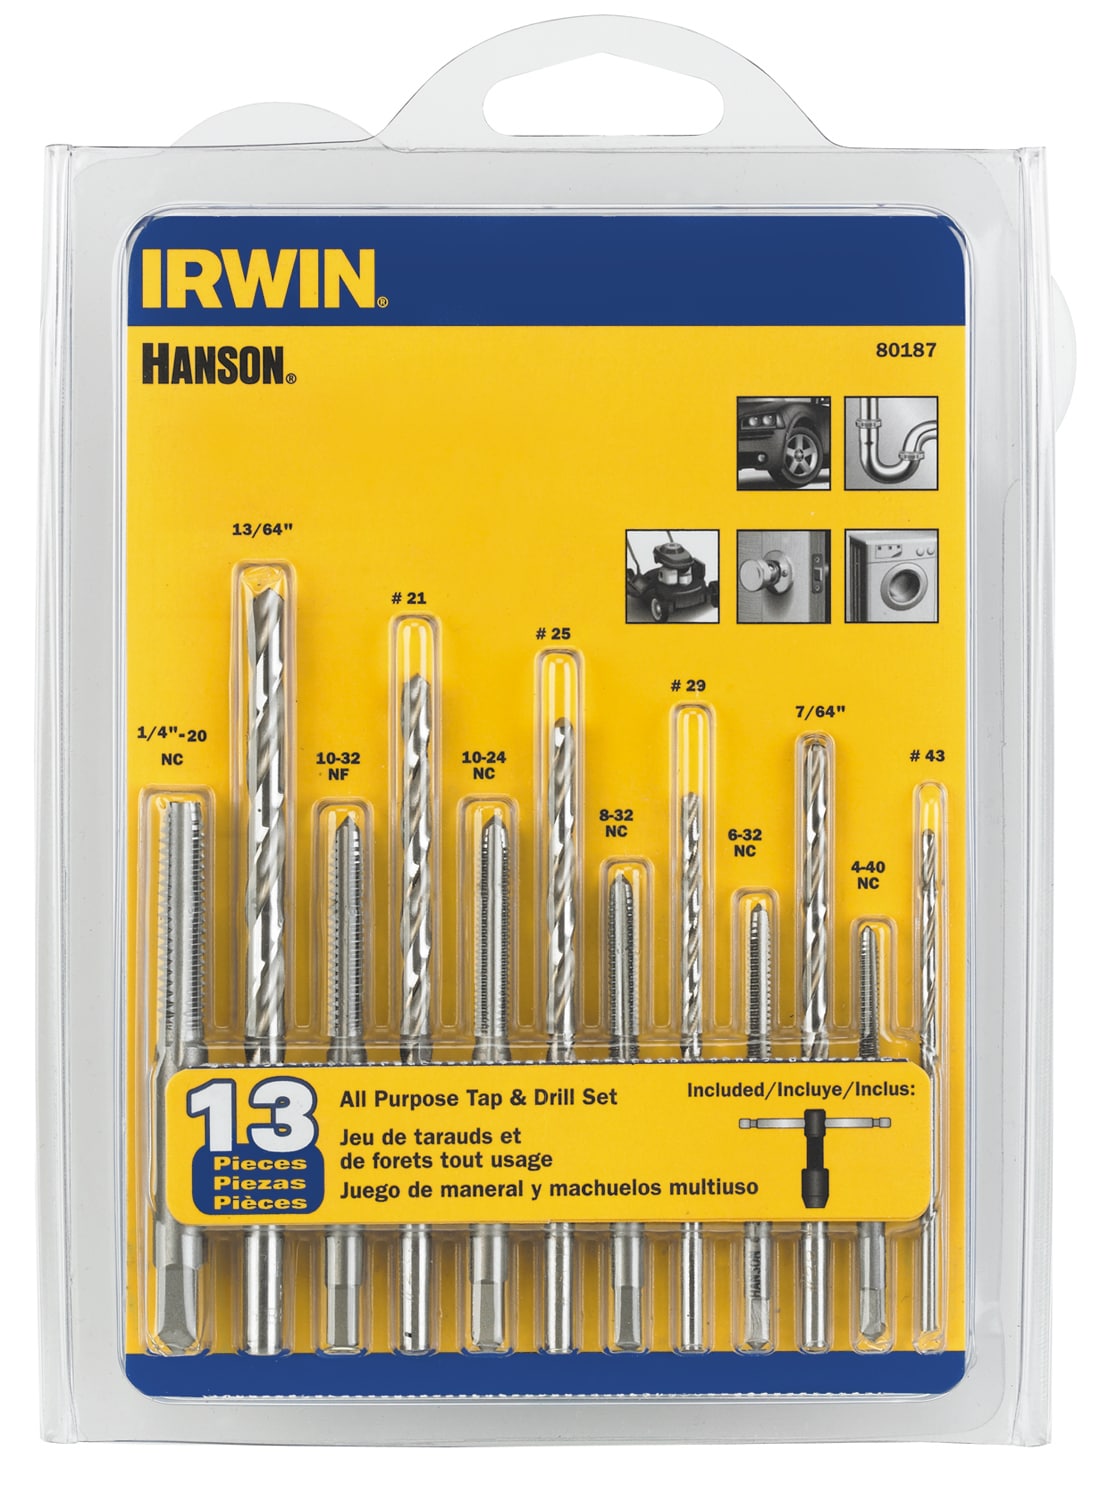 NEW IRWIN 8160 CARBON STEEL QUALITY 3/4-16 SAE QUALITY THREAD CUTTING DRILL TAP 